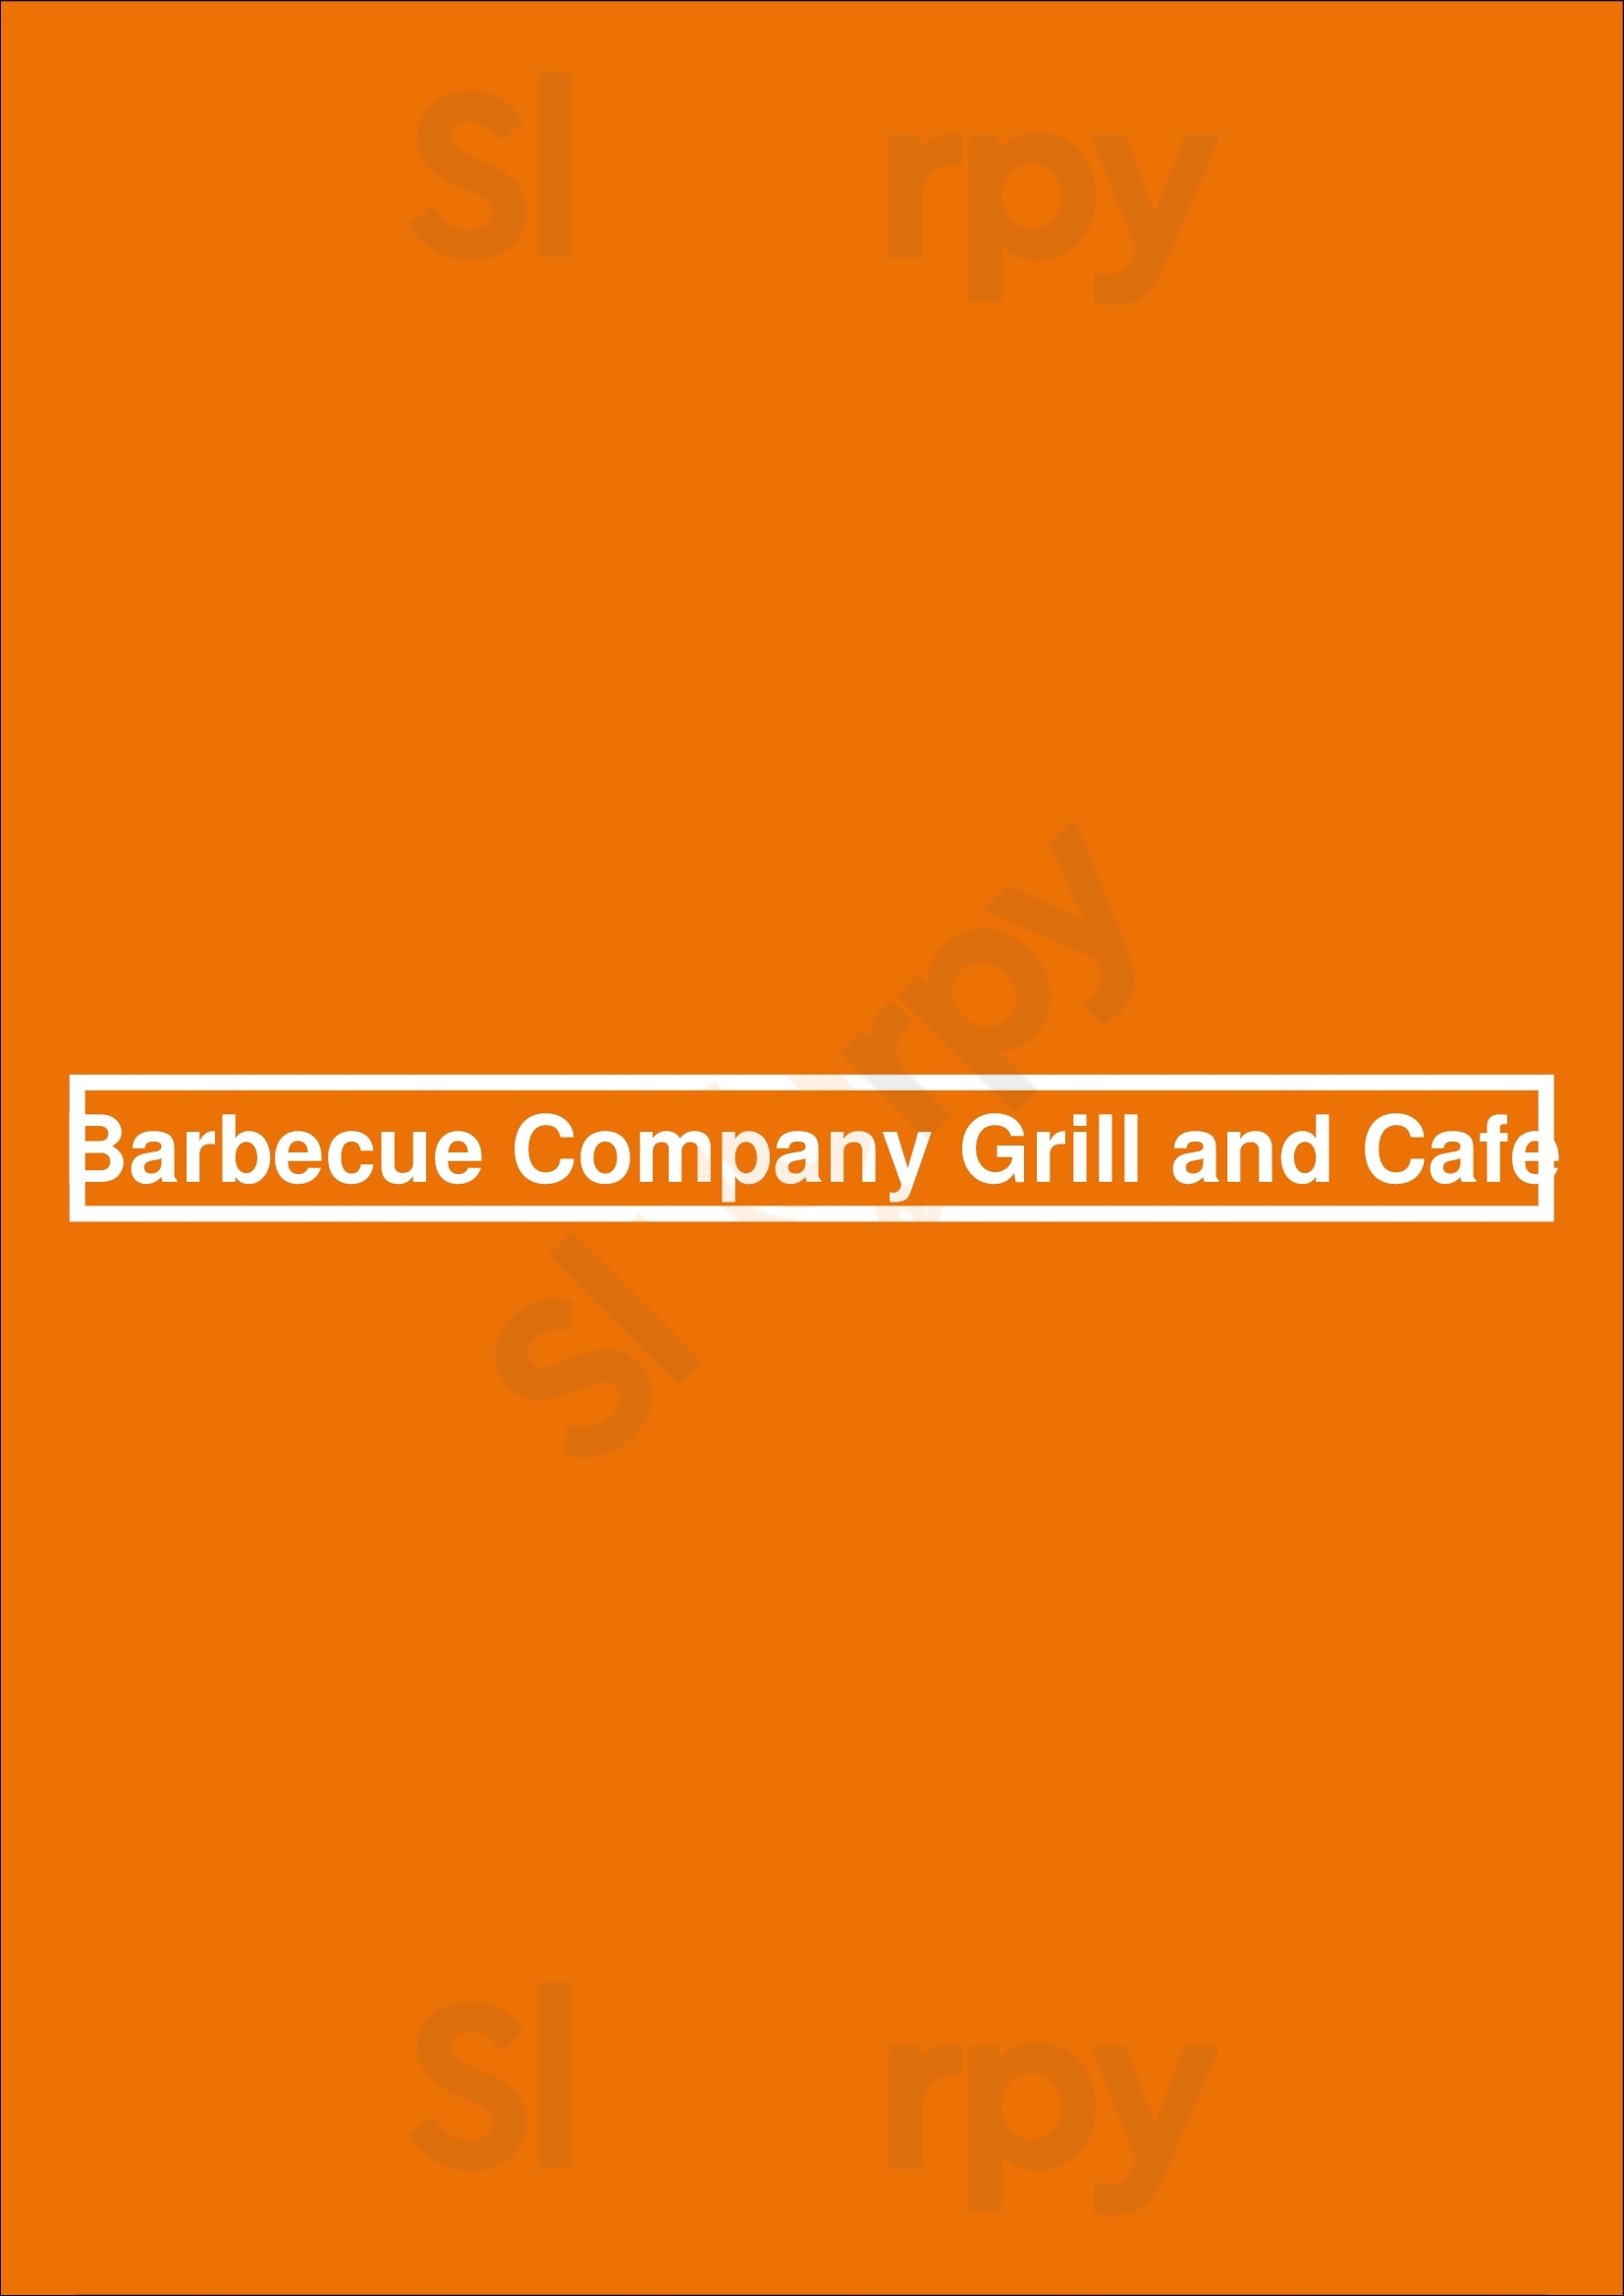 Barbecue Company Grill And Cafe Phoenix Menu - 1